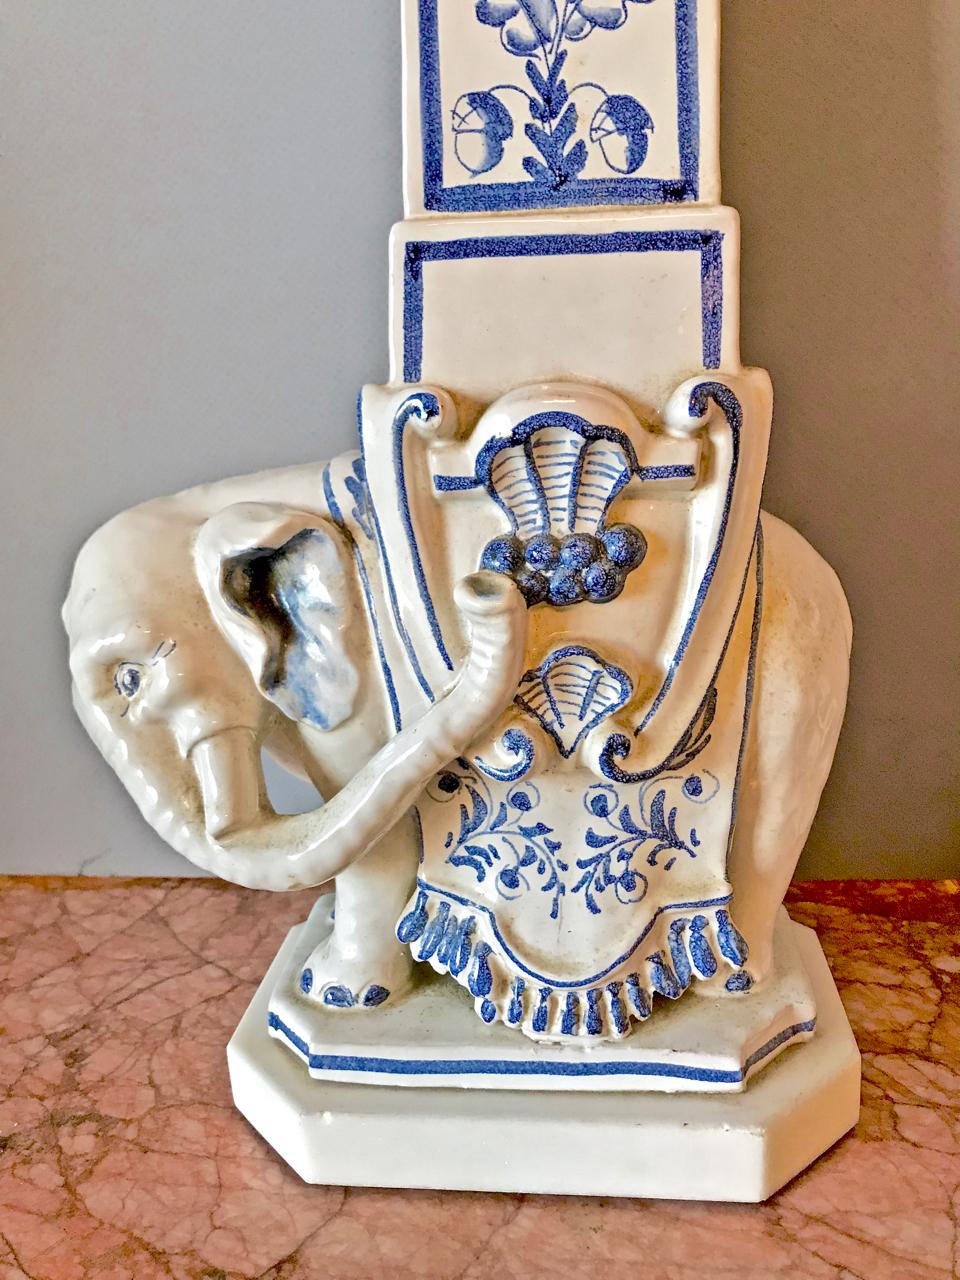 This is a stunning pair of large Italian ceramic lamps inspired by the obelisk found in the Piazza di Minerva, Rome. The midcentury blue and white pottery features a well-sculptured Indian elephant supporting a tall obelisk with neoclassical style